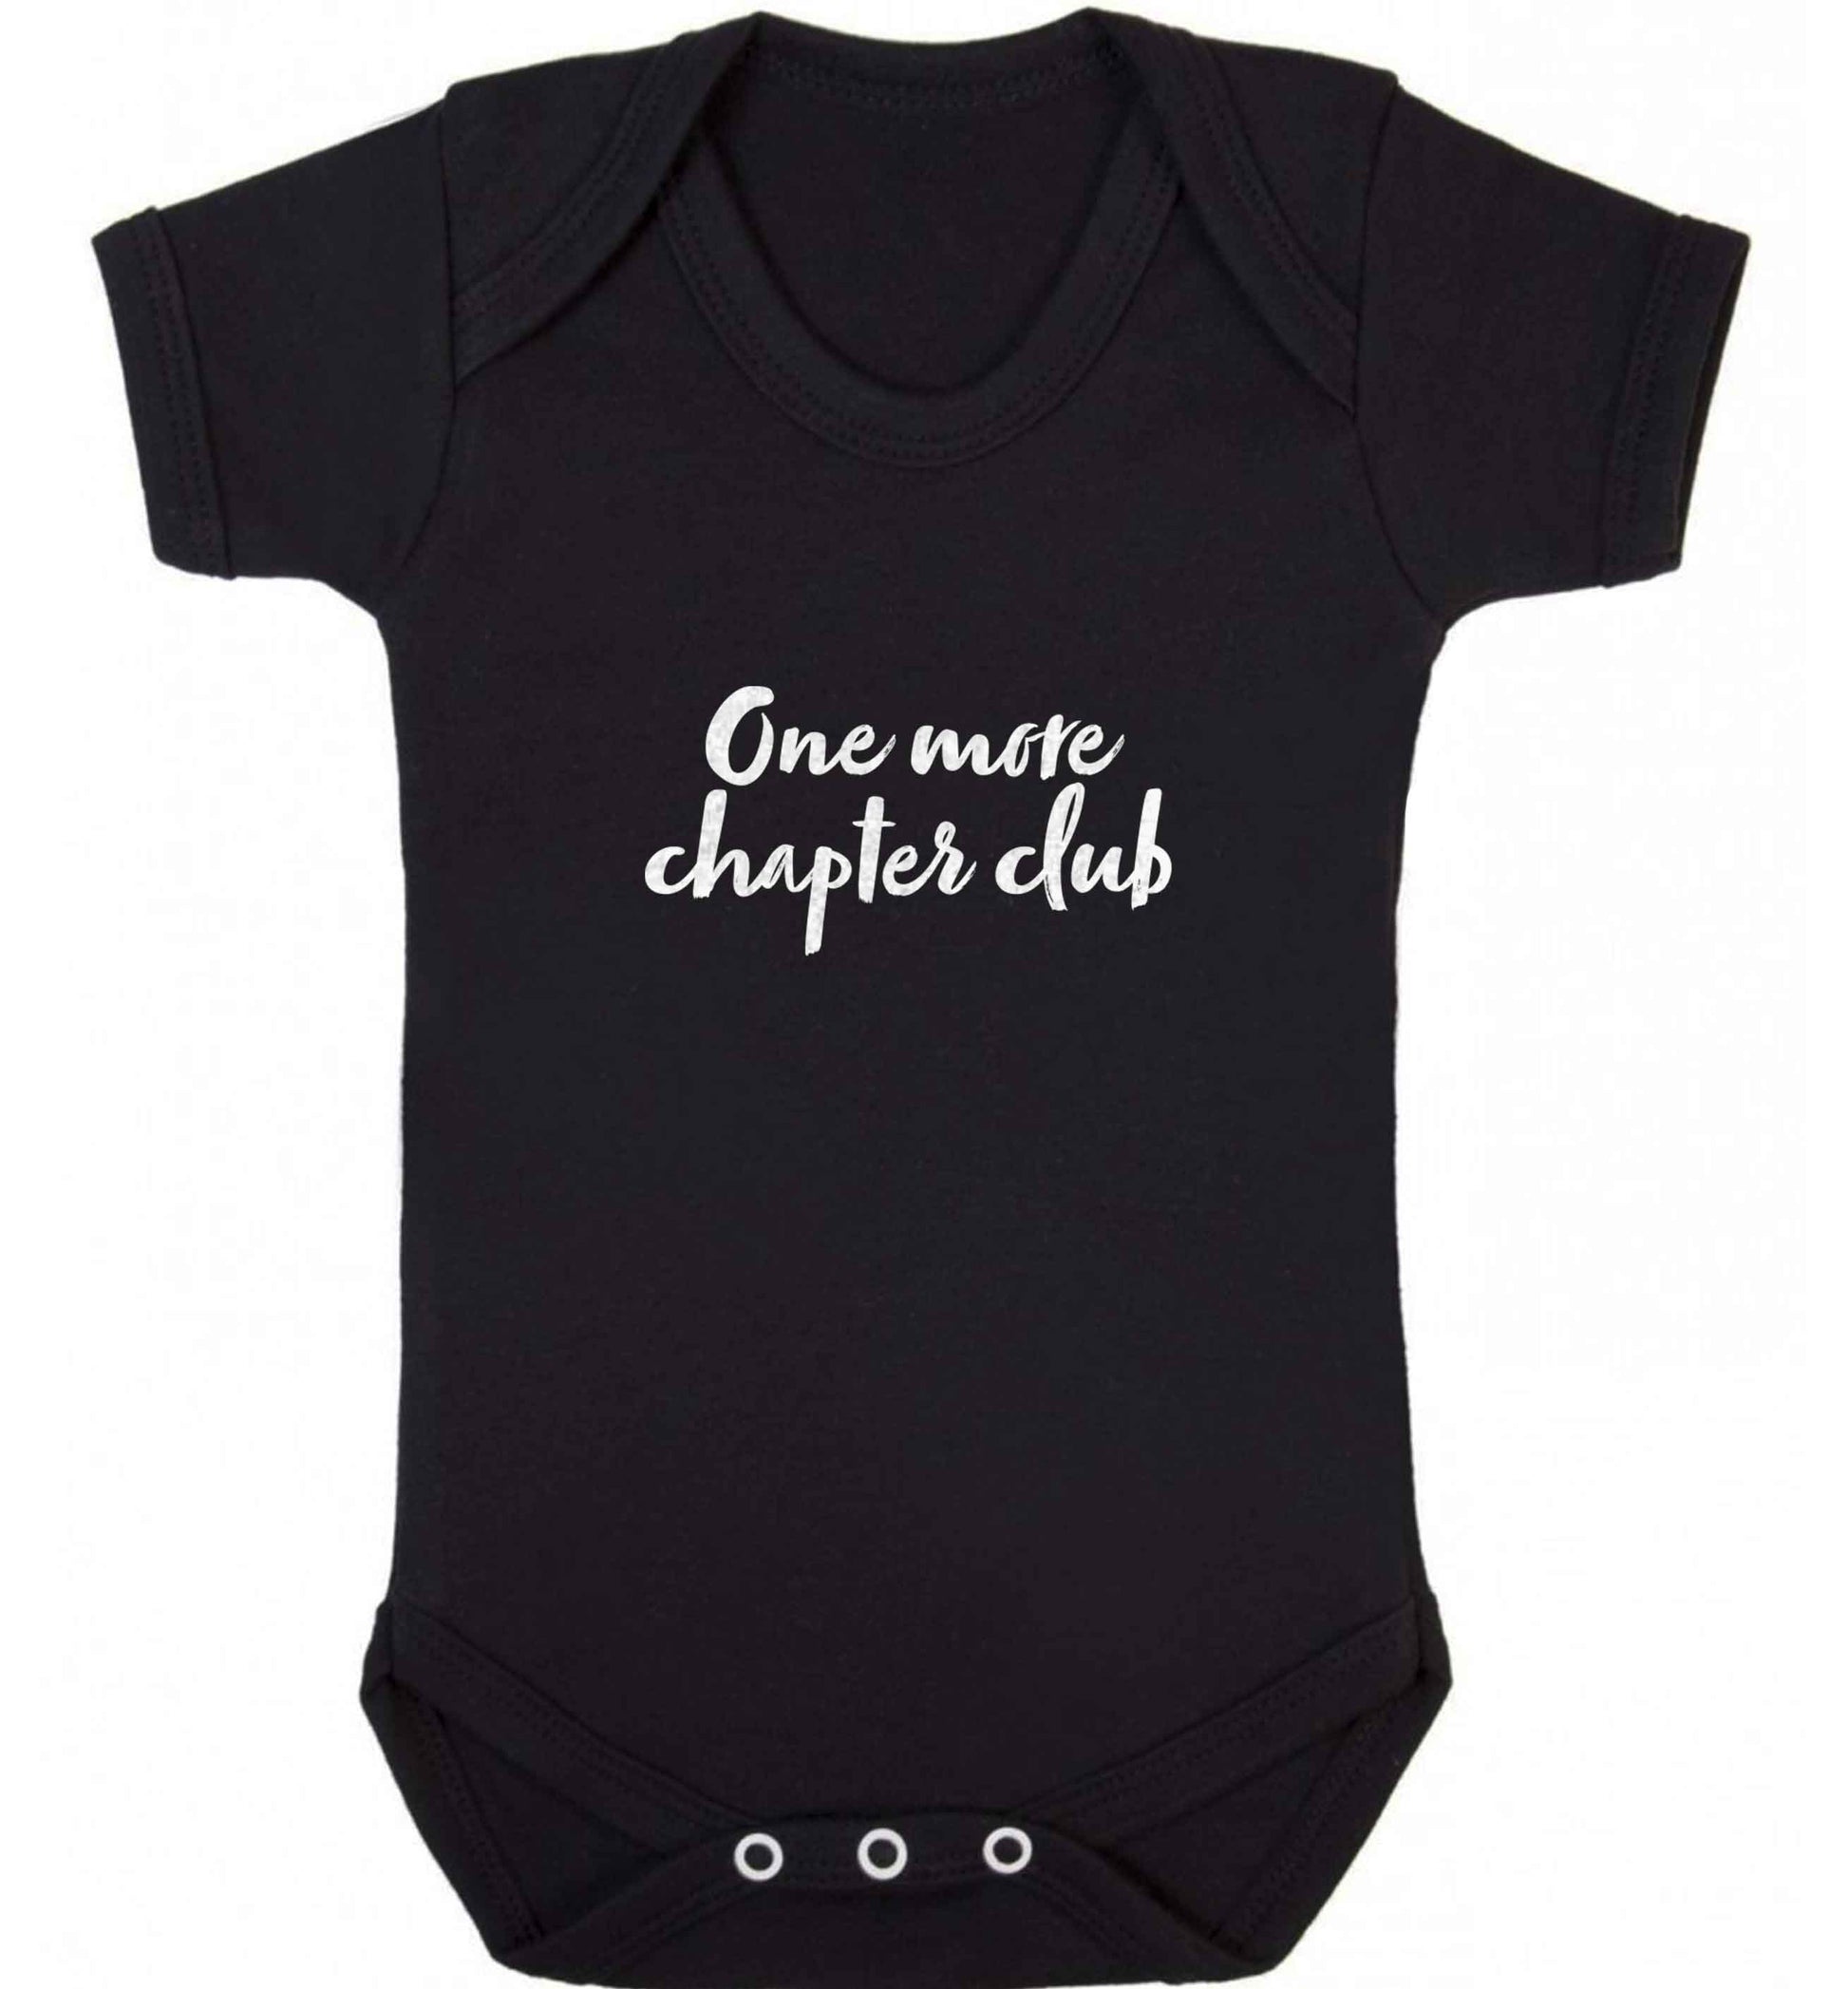 One more chapter club Kit baby vest black 18-24 months